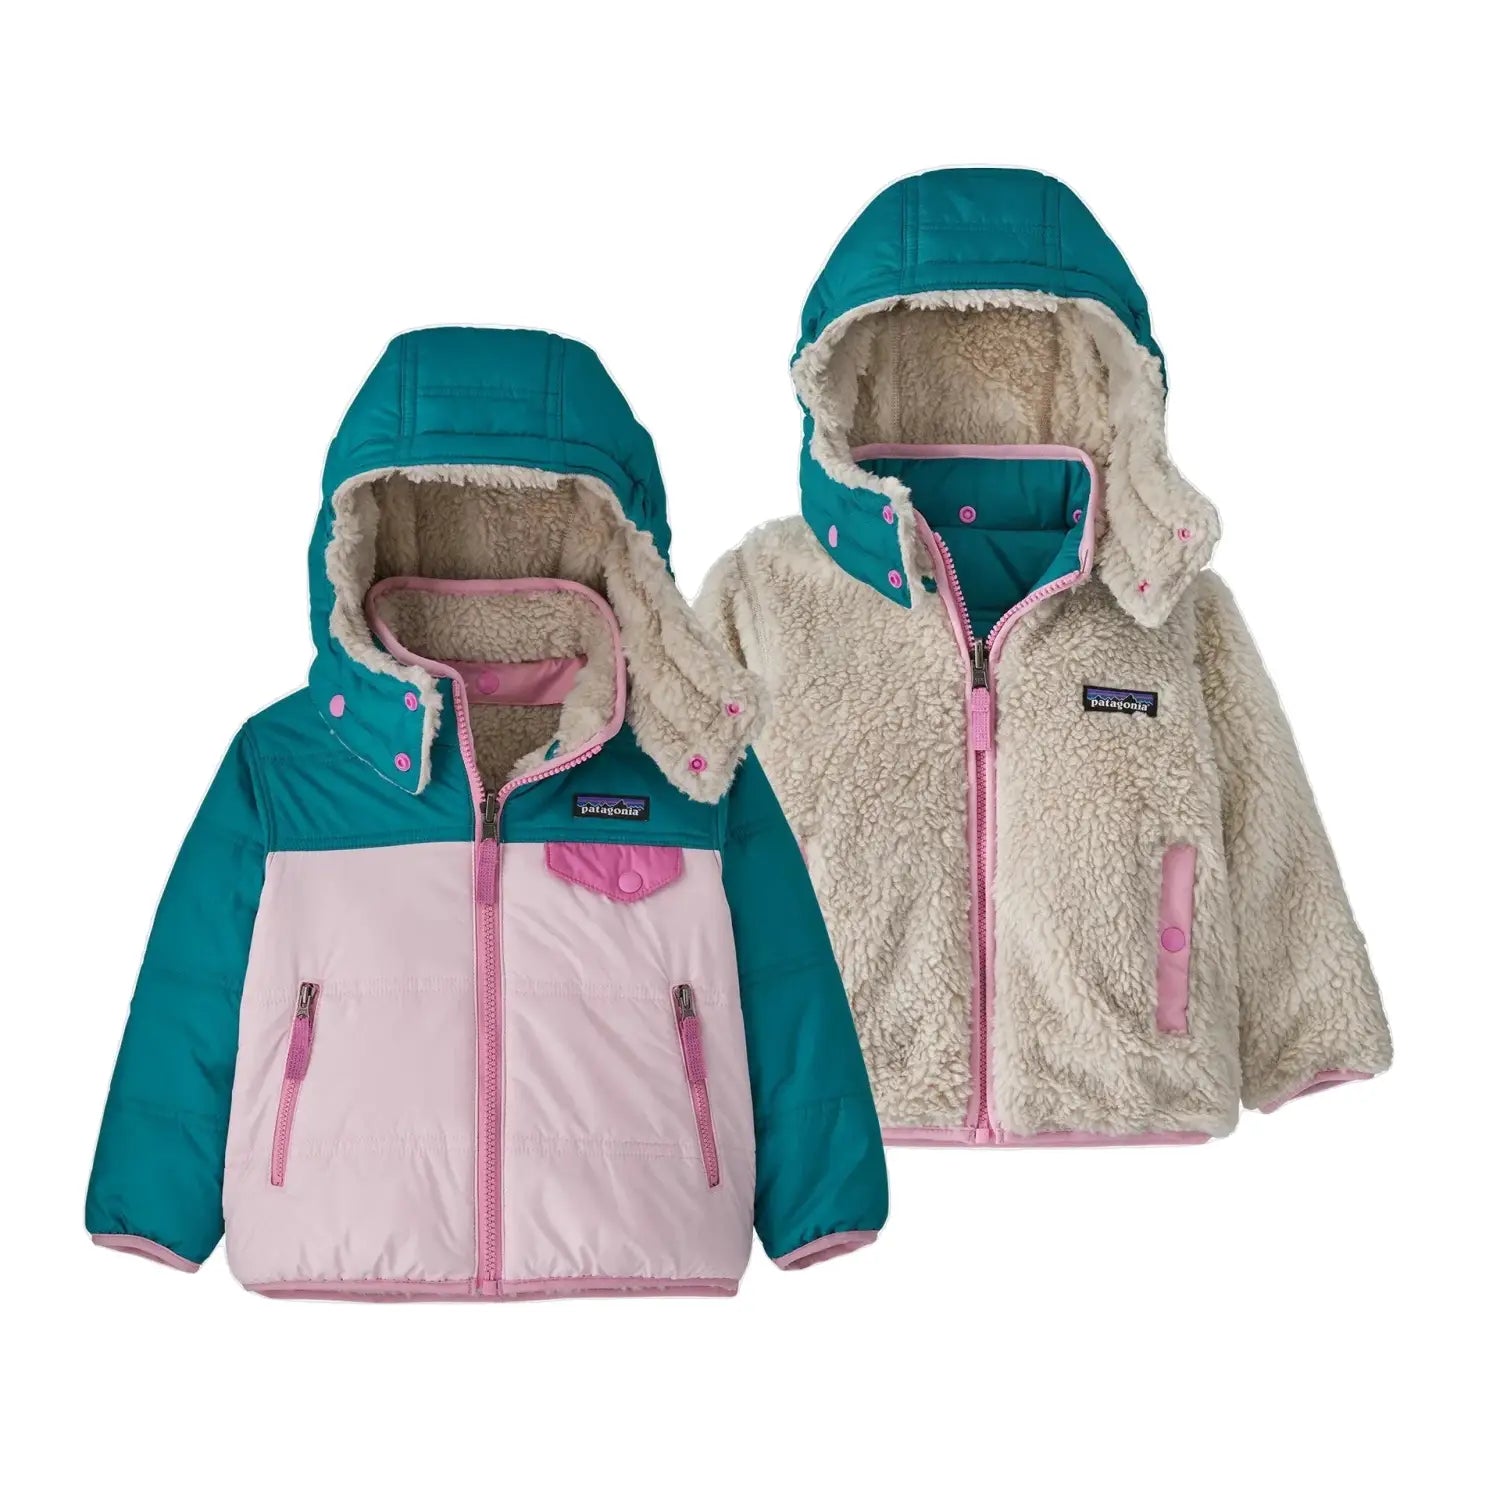 Patagonia Baby Reversible Tribbles Hoody shown in Peaceful Pink color option. Teal arms, shoulders and hood. Pink chest with darker shade of pink trim. Reversed also shown with cream fleece.